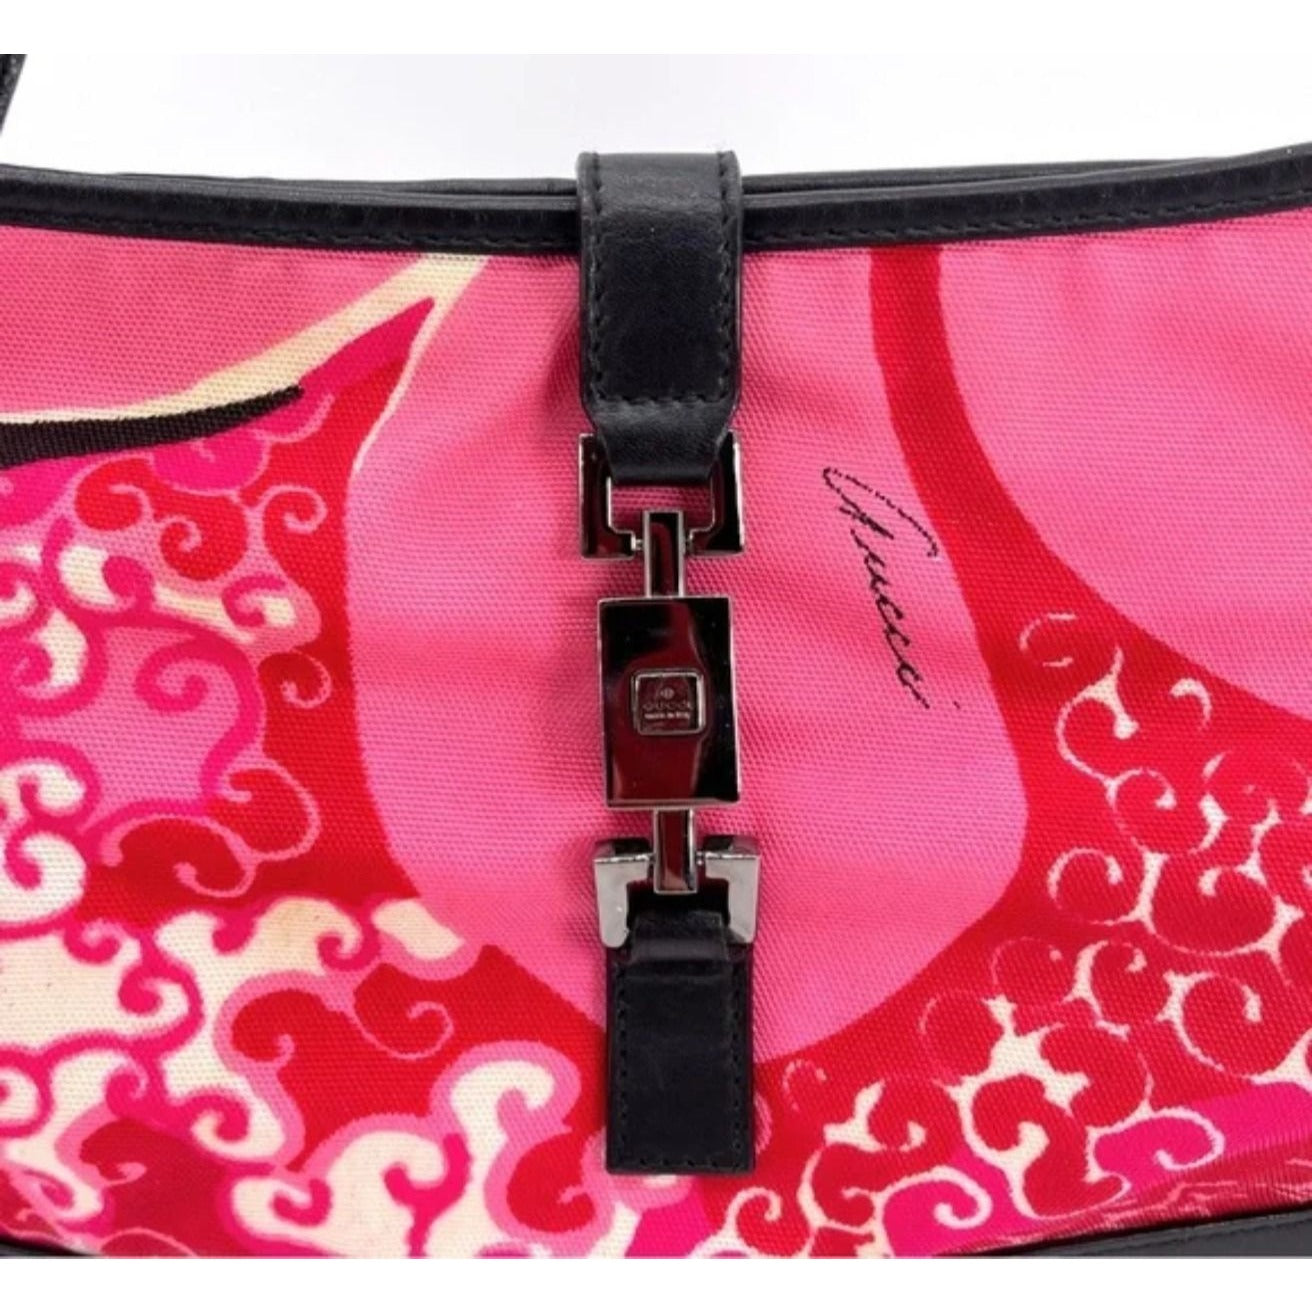 RARE, Tom Ford 1999 Gucci, pink & red 60's abstract floral print & black leather, Jackie hobo style purse with a chrome push lock closure,